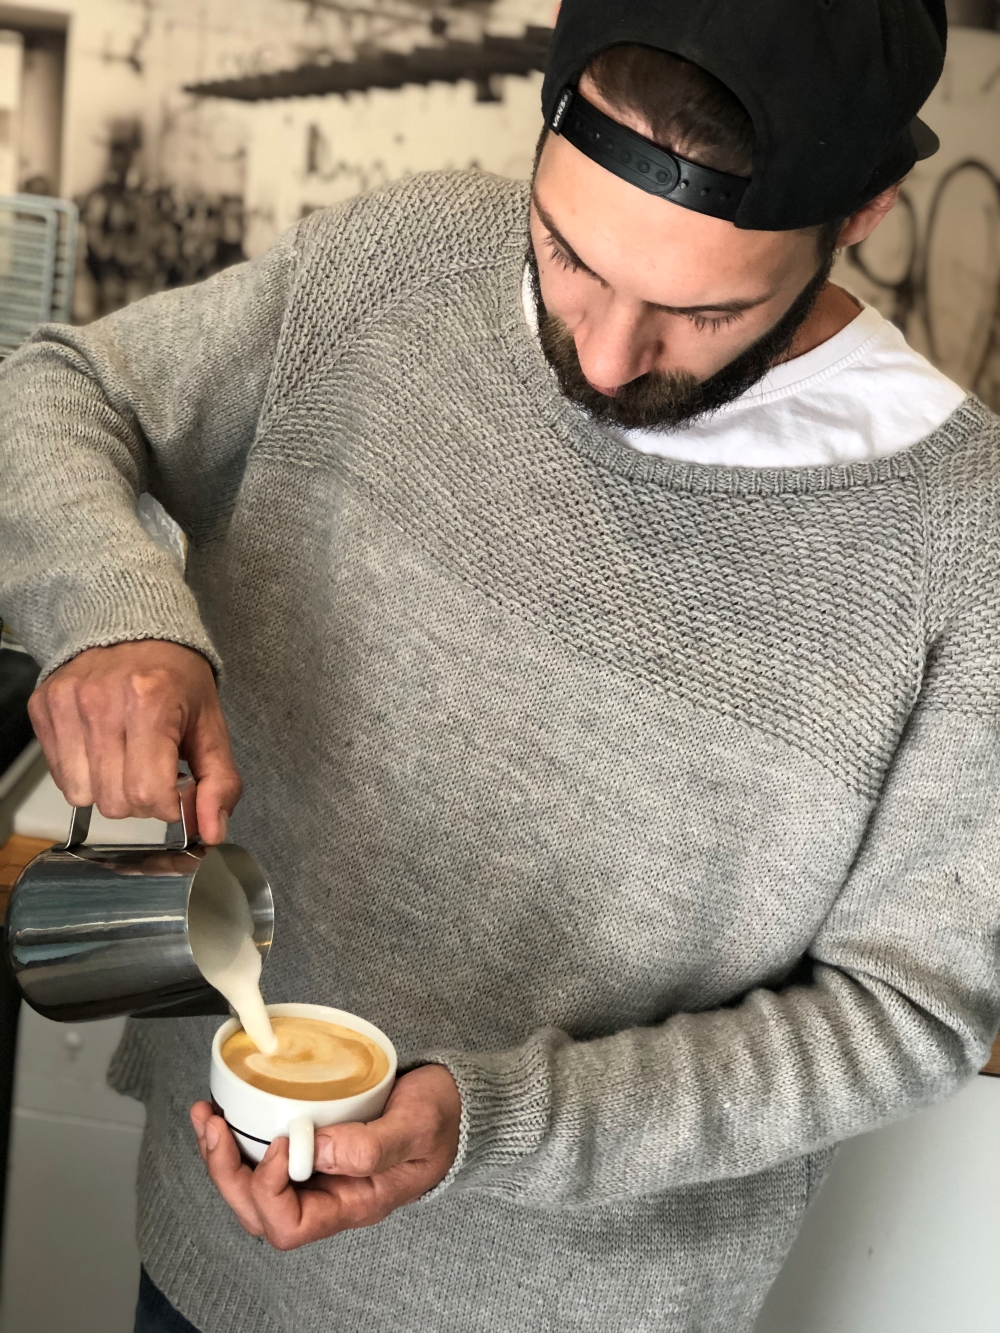 A man in a melane grey handknitted sweater is pouring coffee.